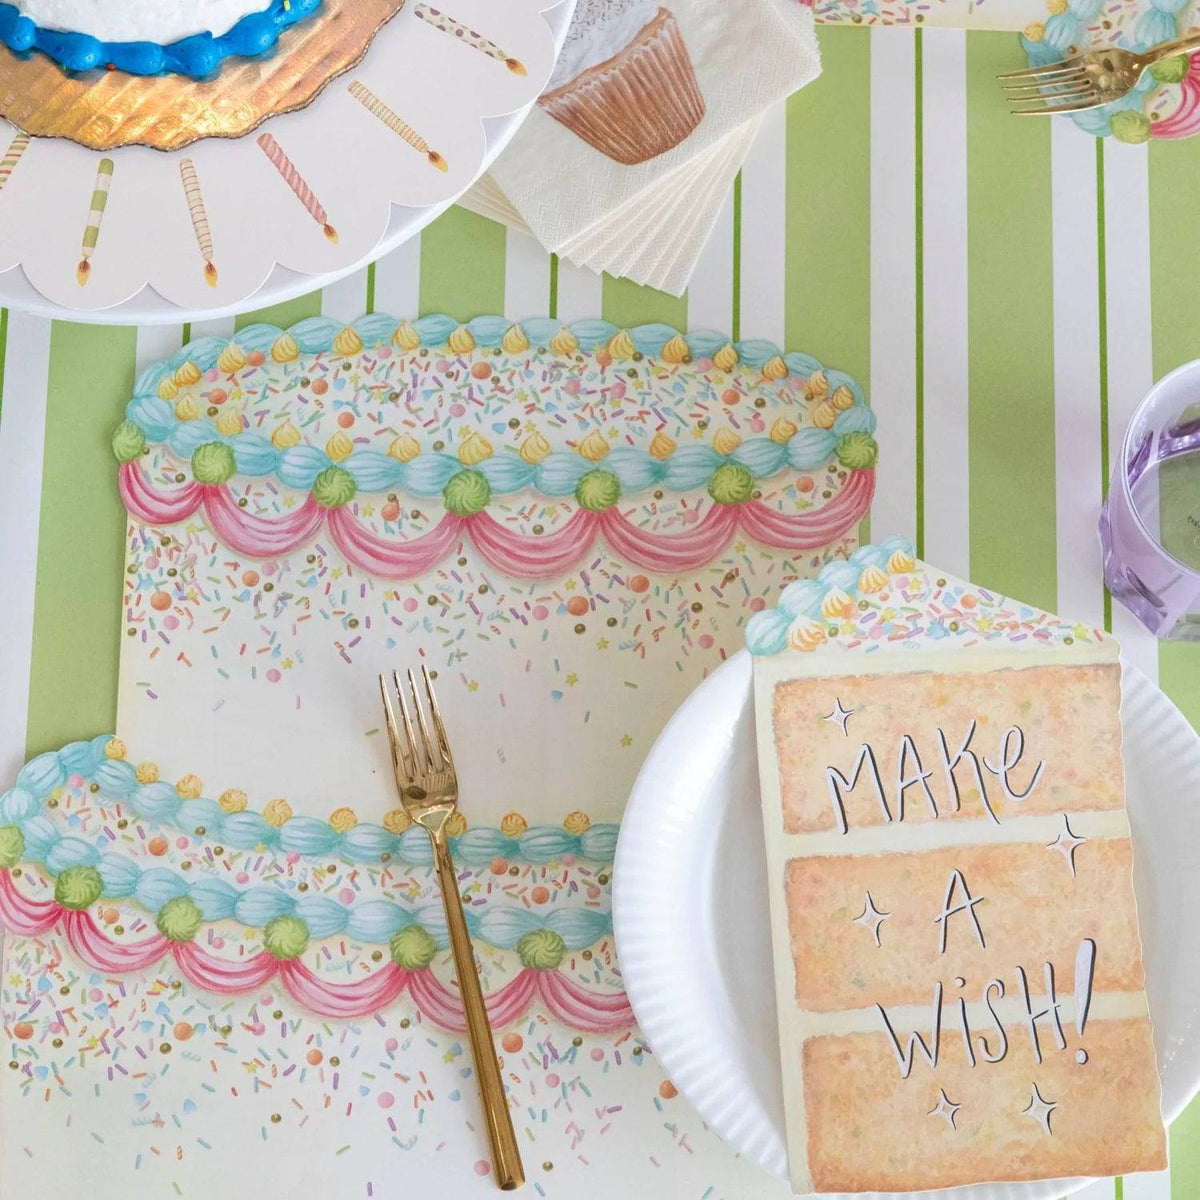 Die-Cut Birthday Placemats - The Preppy Bunny